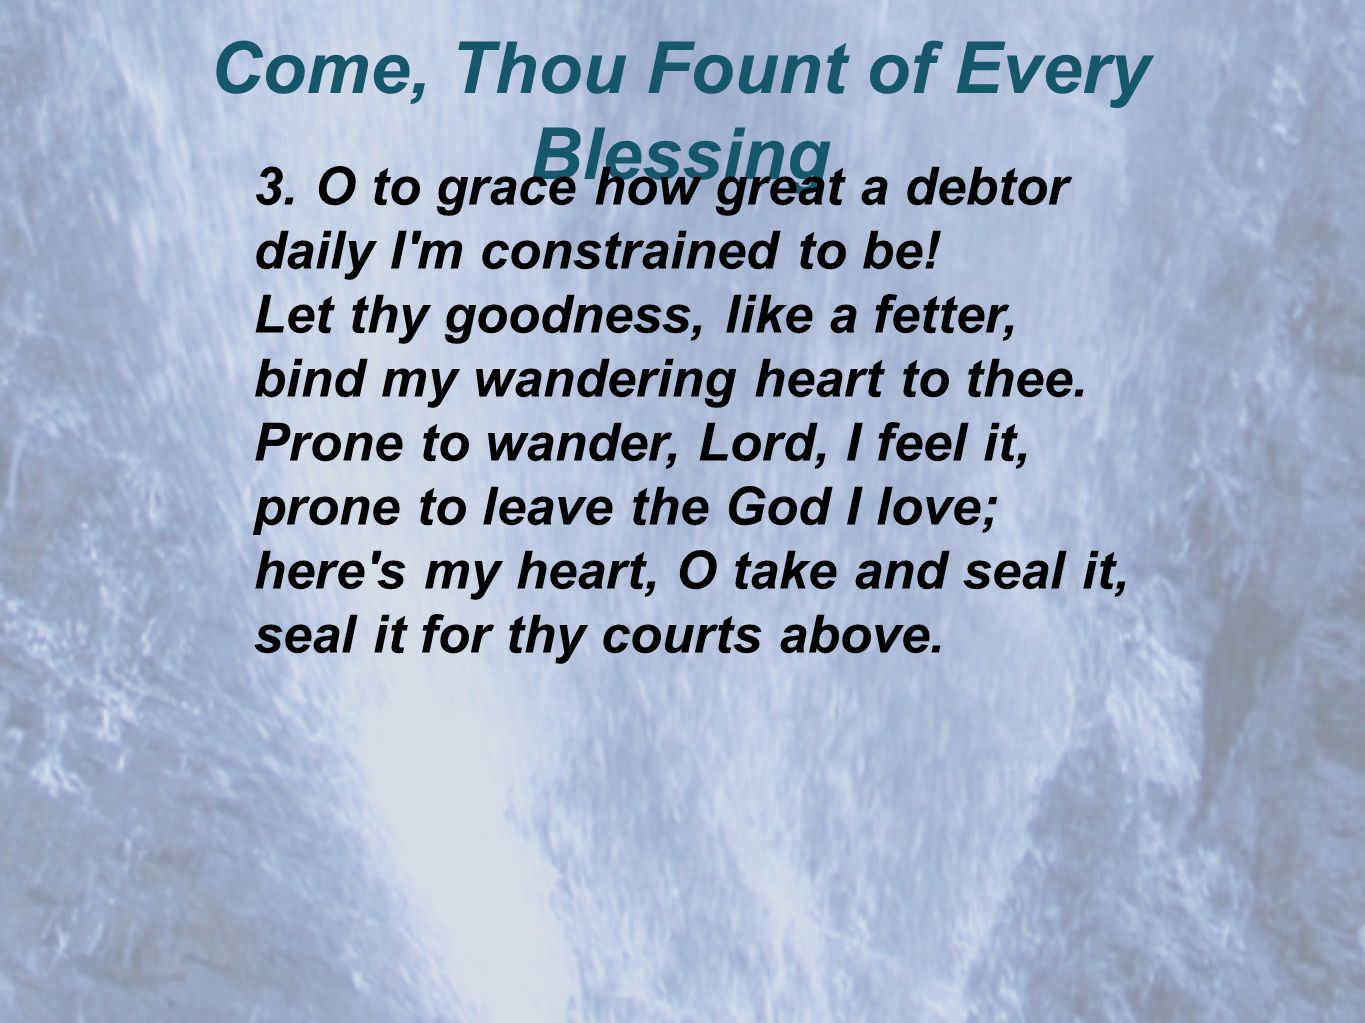 Come, Thou Fount of Every Blessing 3.O to grace how great a debtor daily I m constrained to be.